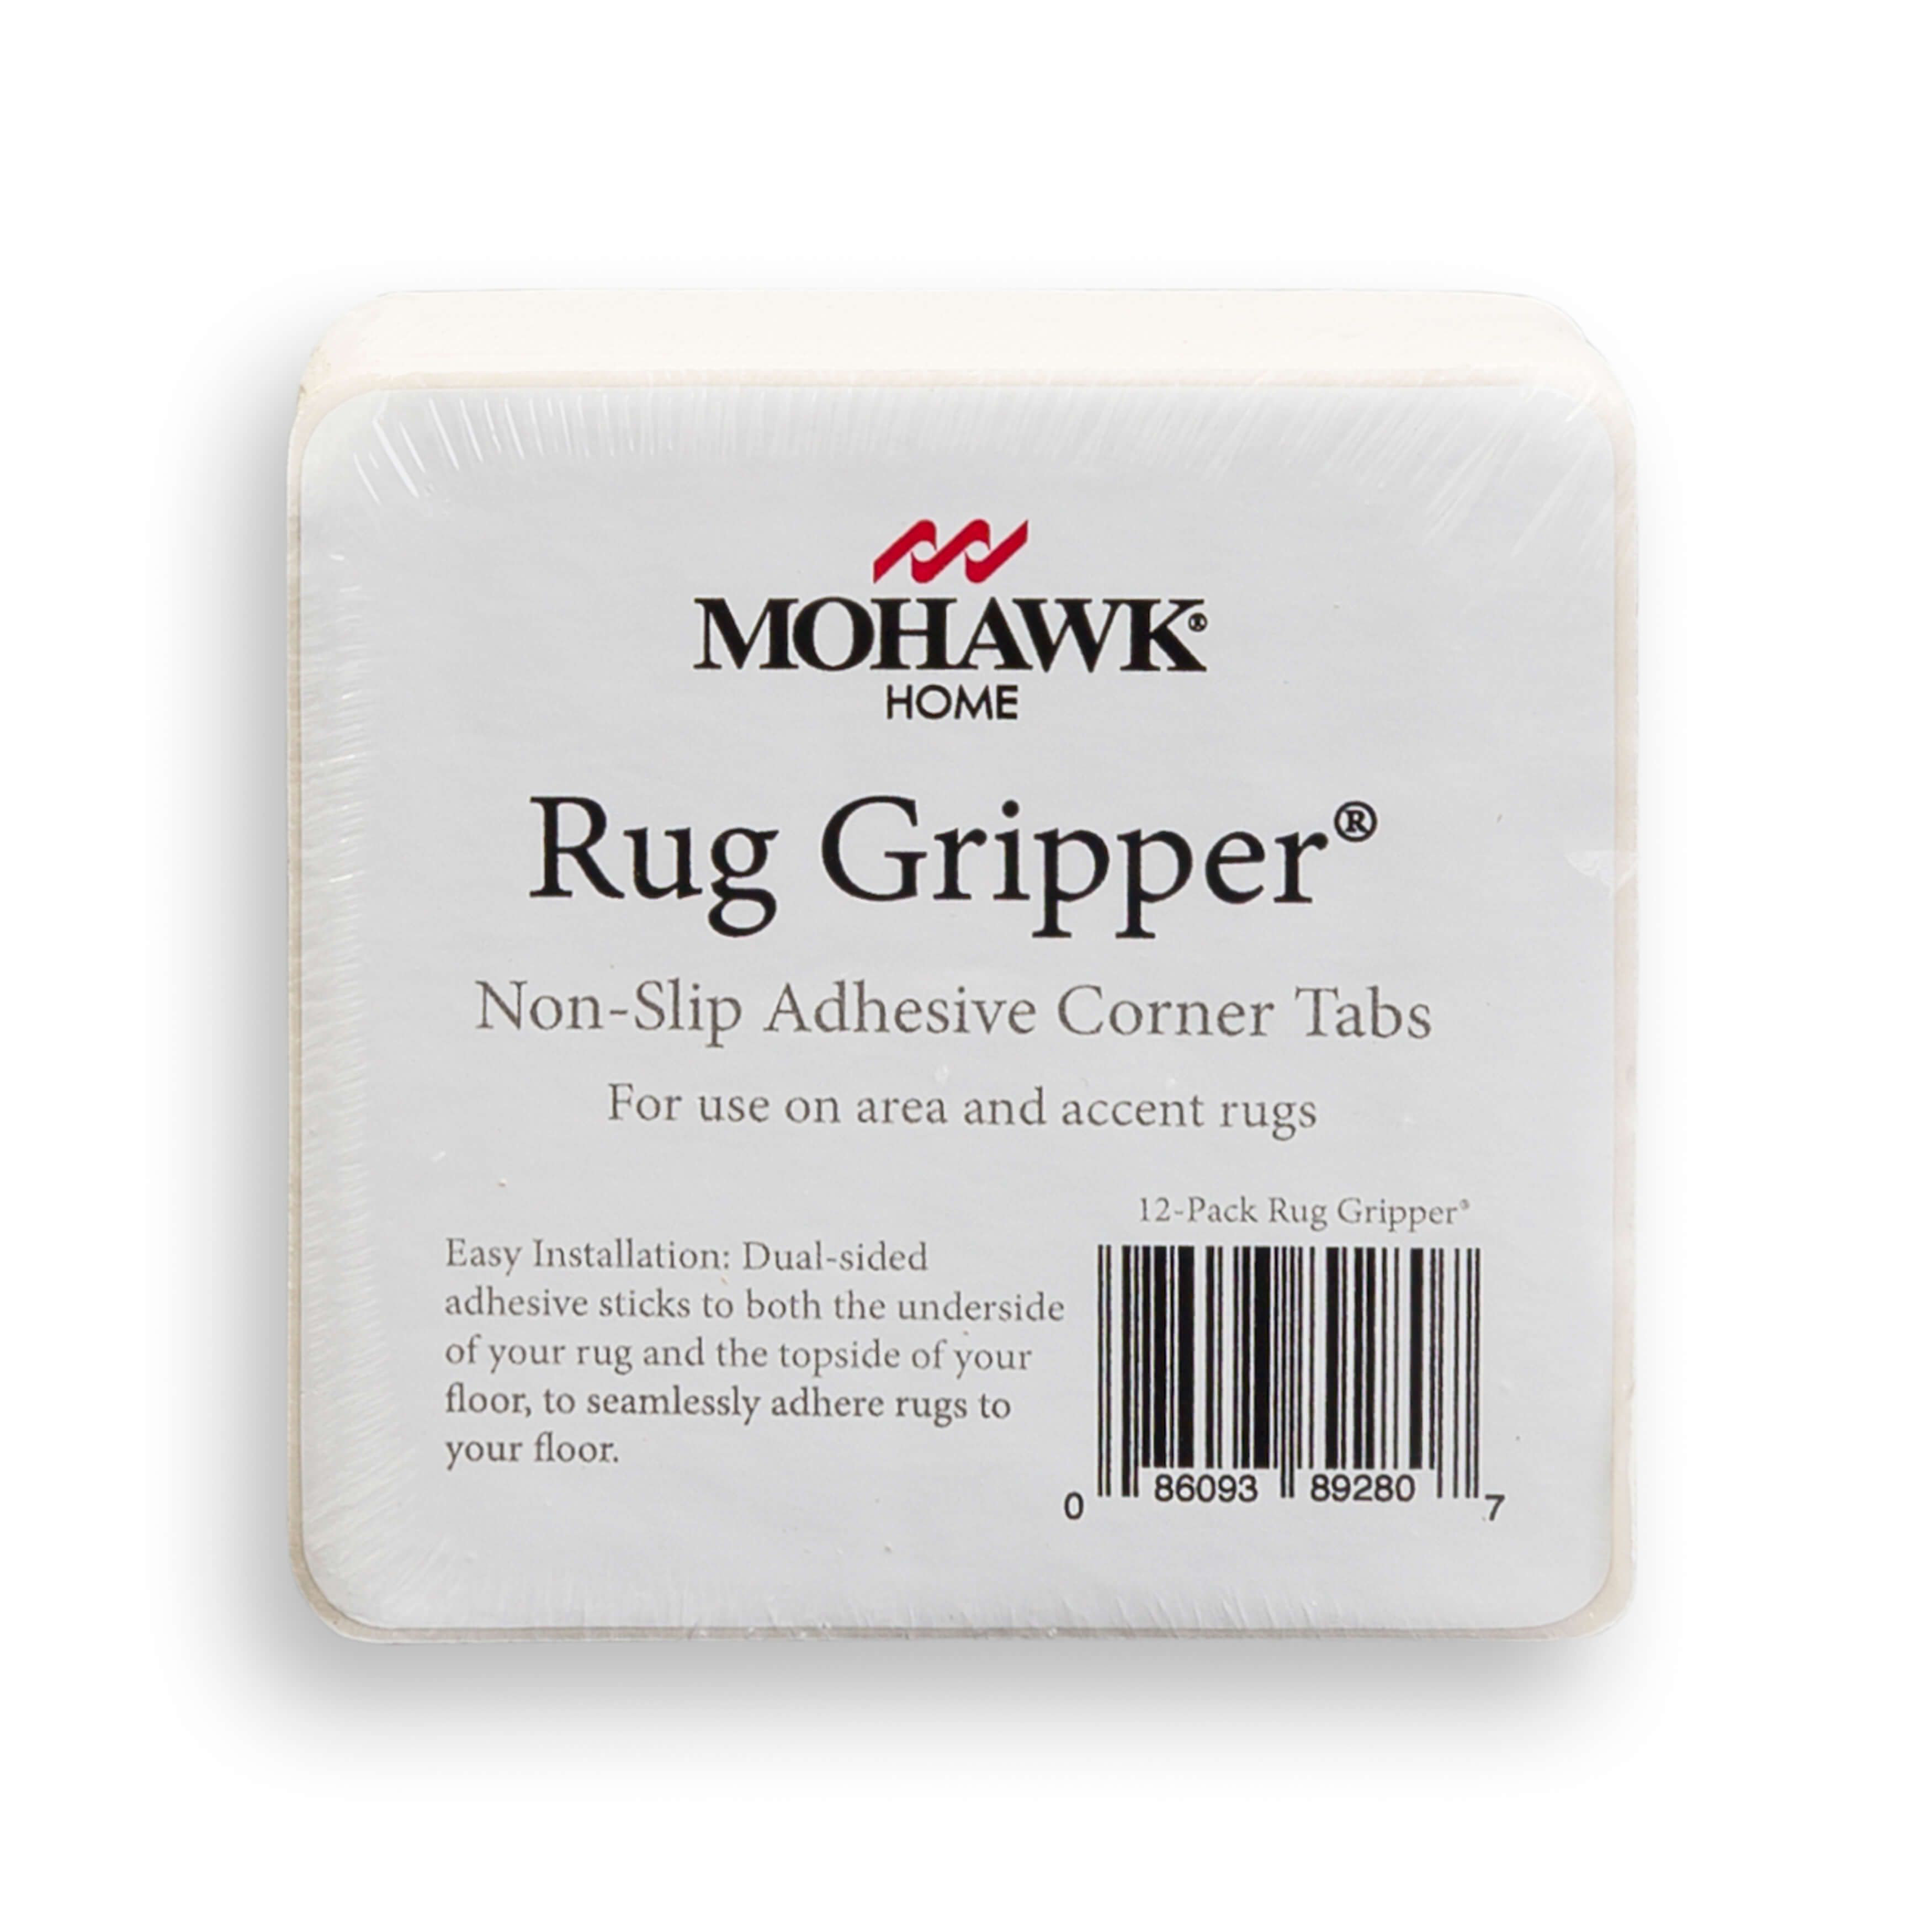 Gripper for Rug, 16 Pack Non Slip Rug Pads Grippers for Hardwood Floors,  Anti Slip Rug Corner Grippers for Area Rugs, Rug Carpet Tapes to Prevent